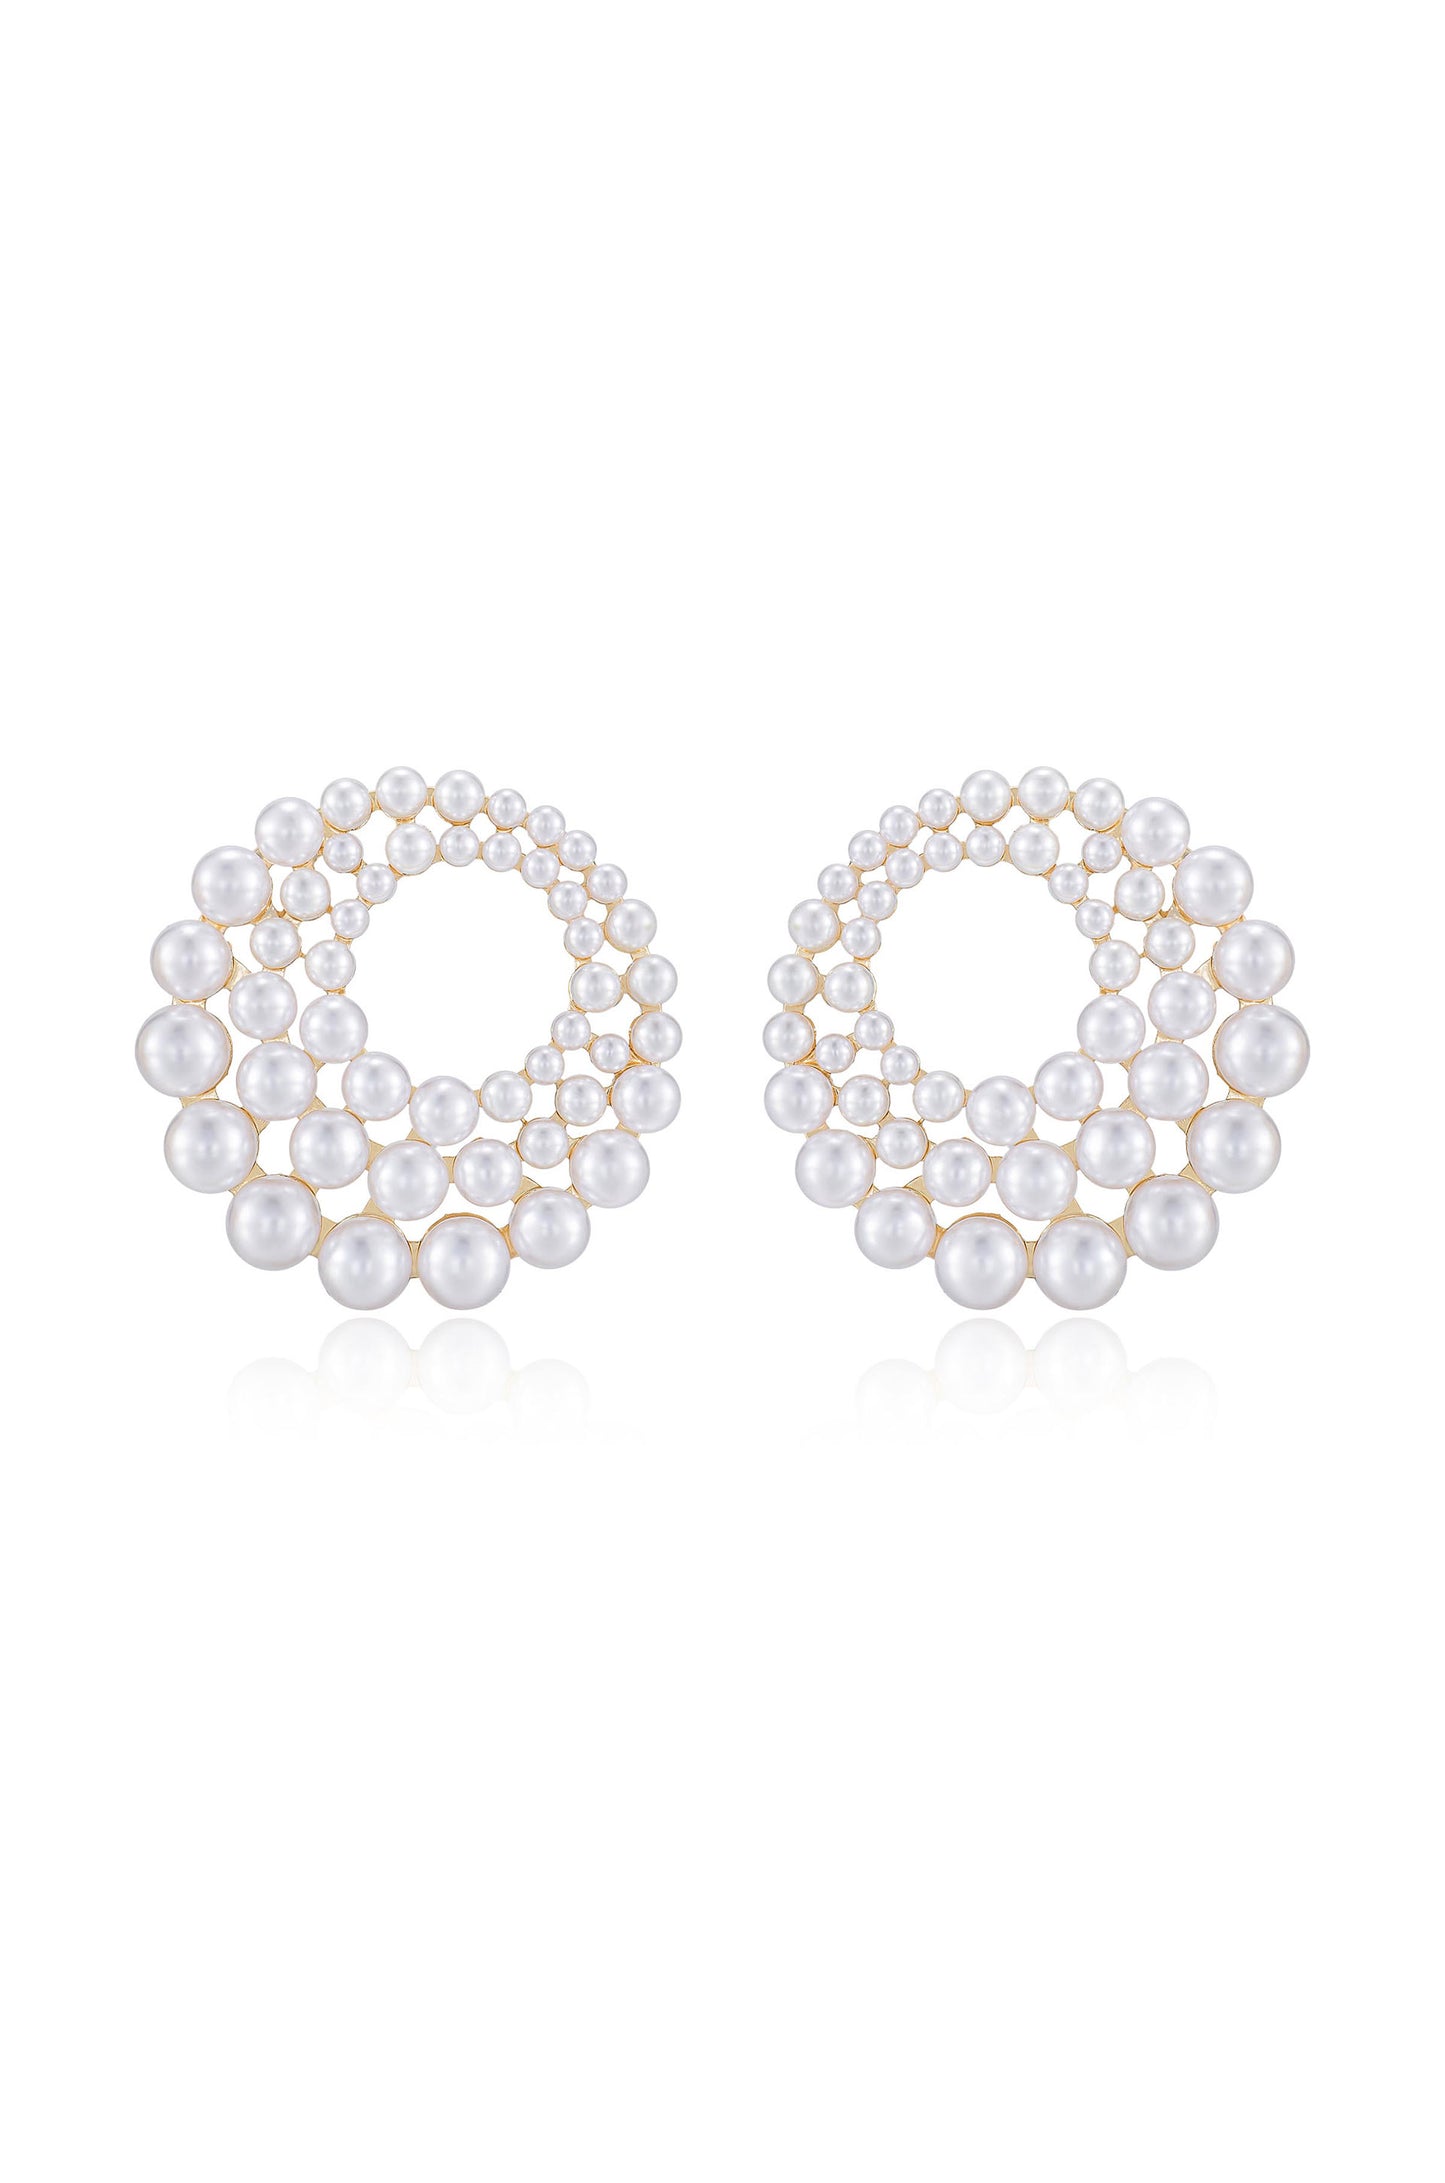 Blushing Pearl 18k Gold Plated Earrings on white